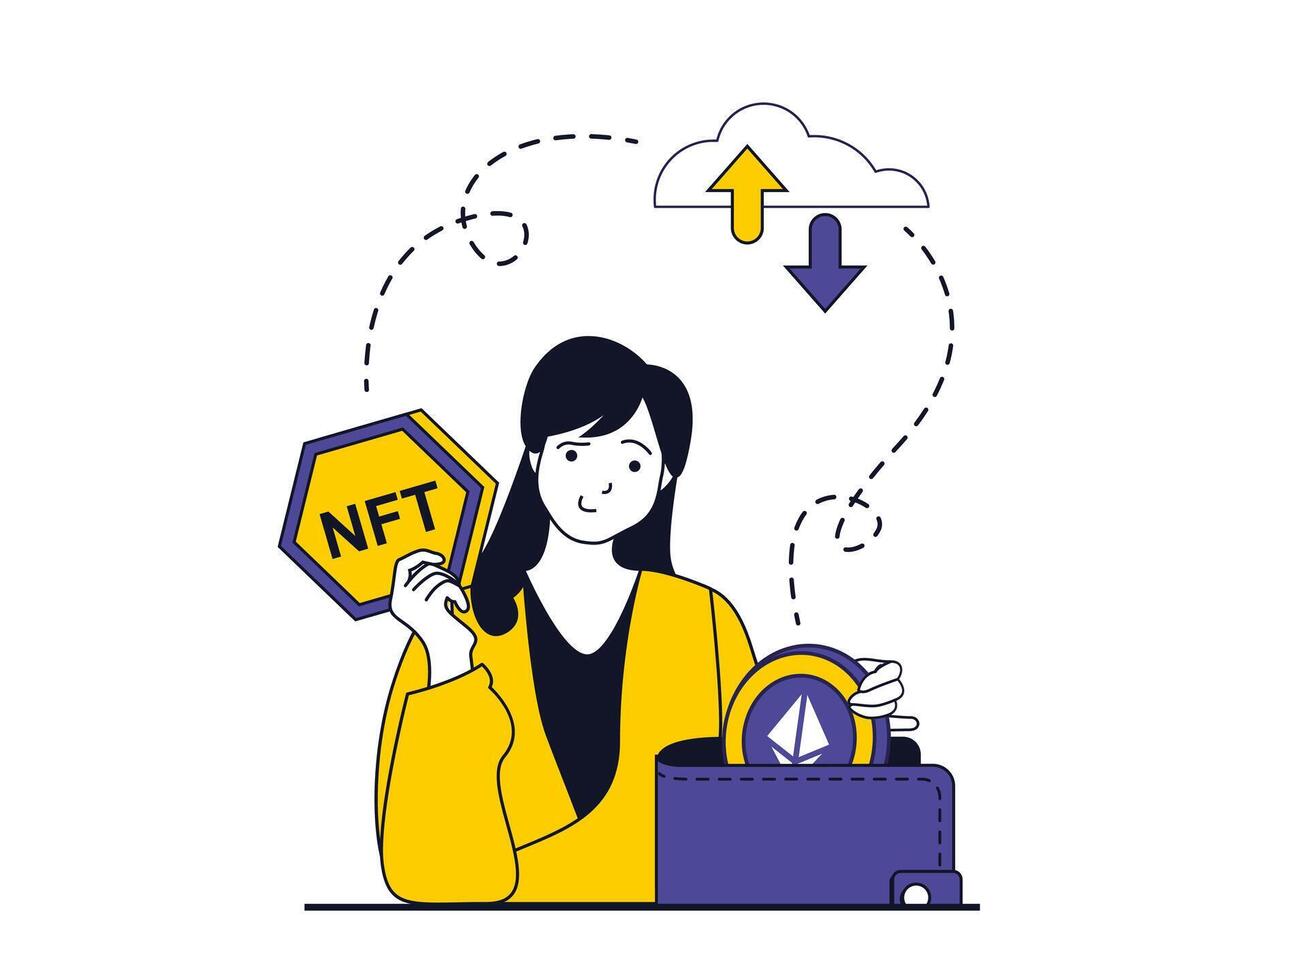 NFT token concept with character situation. Woman making crypto transactions and earning money from selling unique digital artworks. Vector illustration with people scene in flat design for web